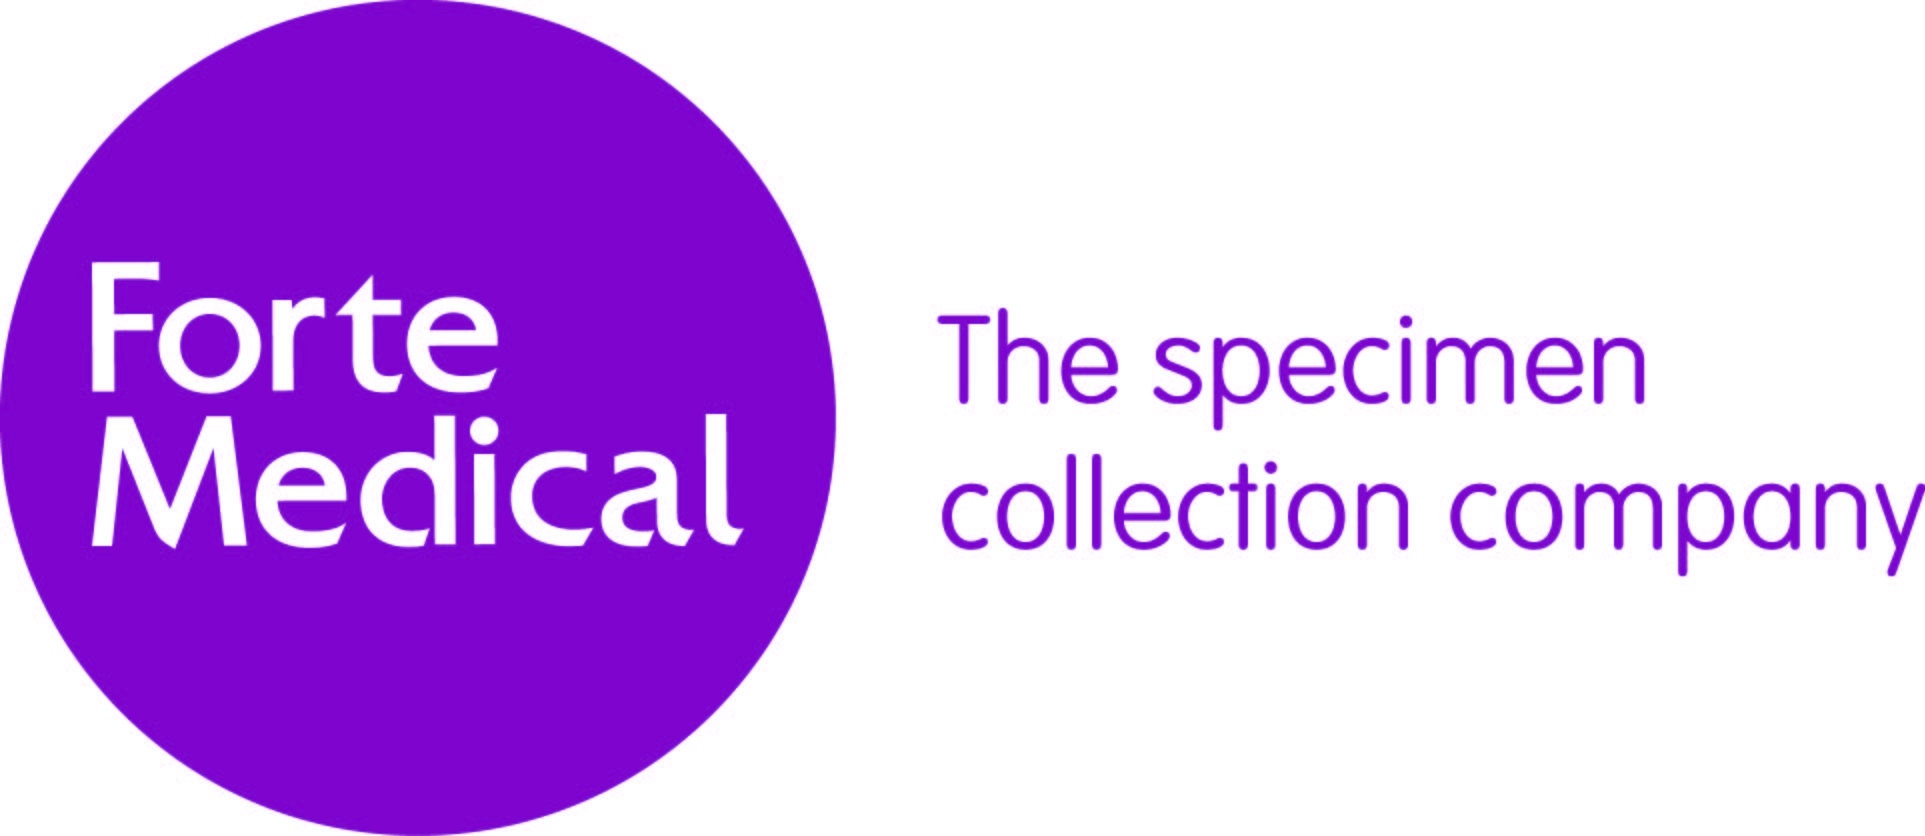 Forte Medical: The Specimen Collection Company